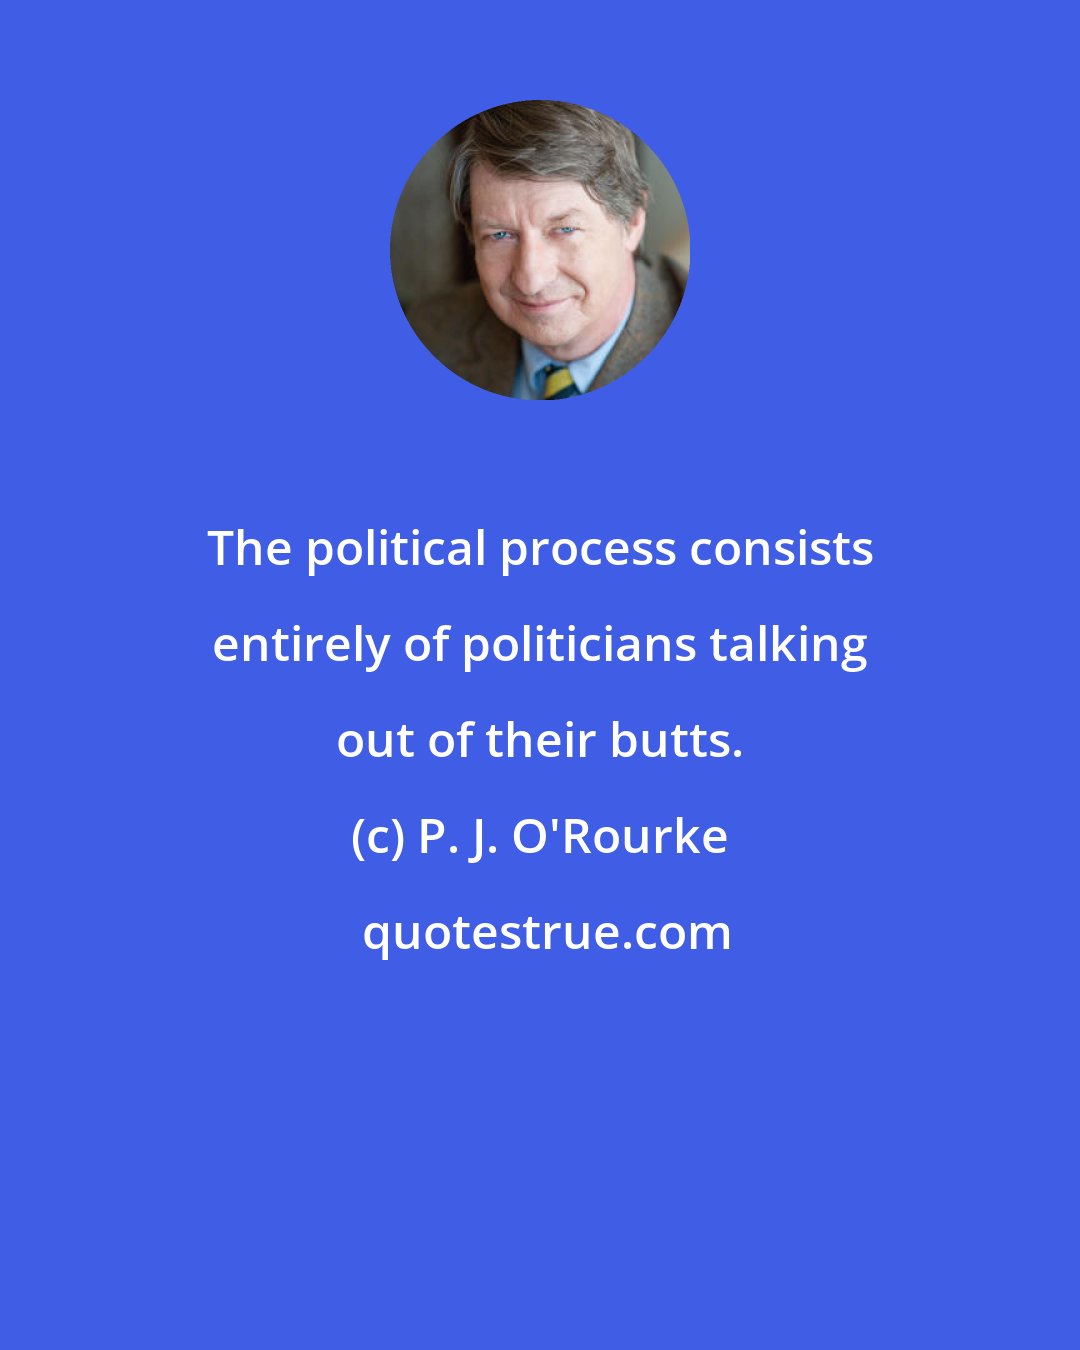 P. J. O'Rourke: The political process consists entirely of politicians talking out of their butts.